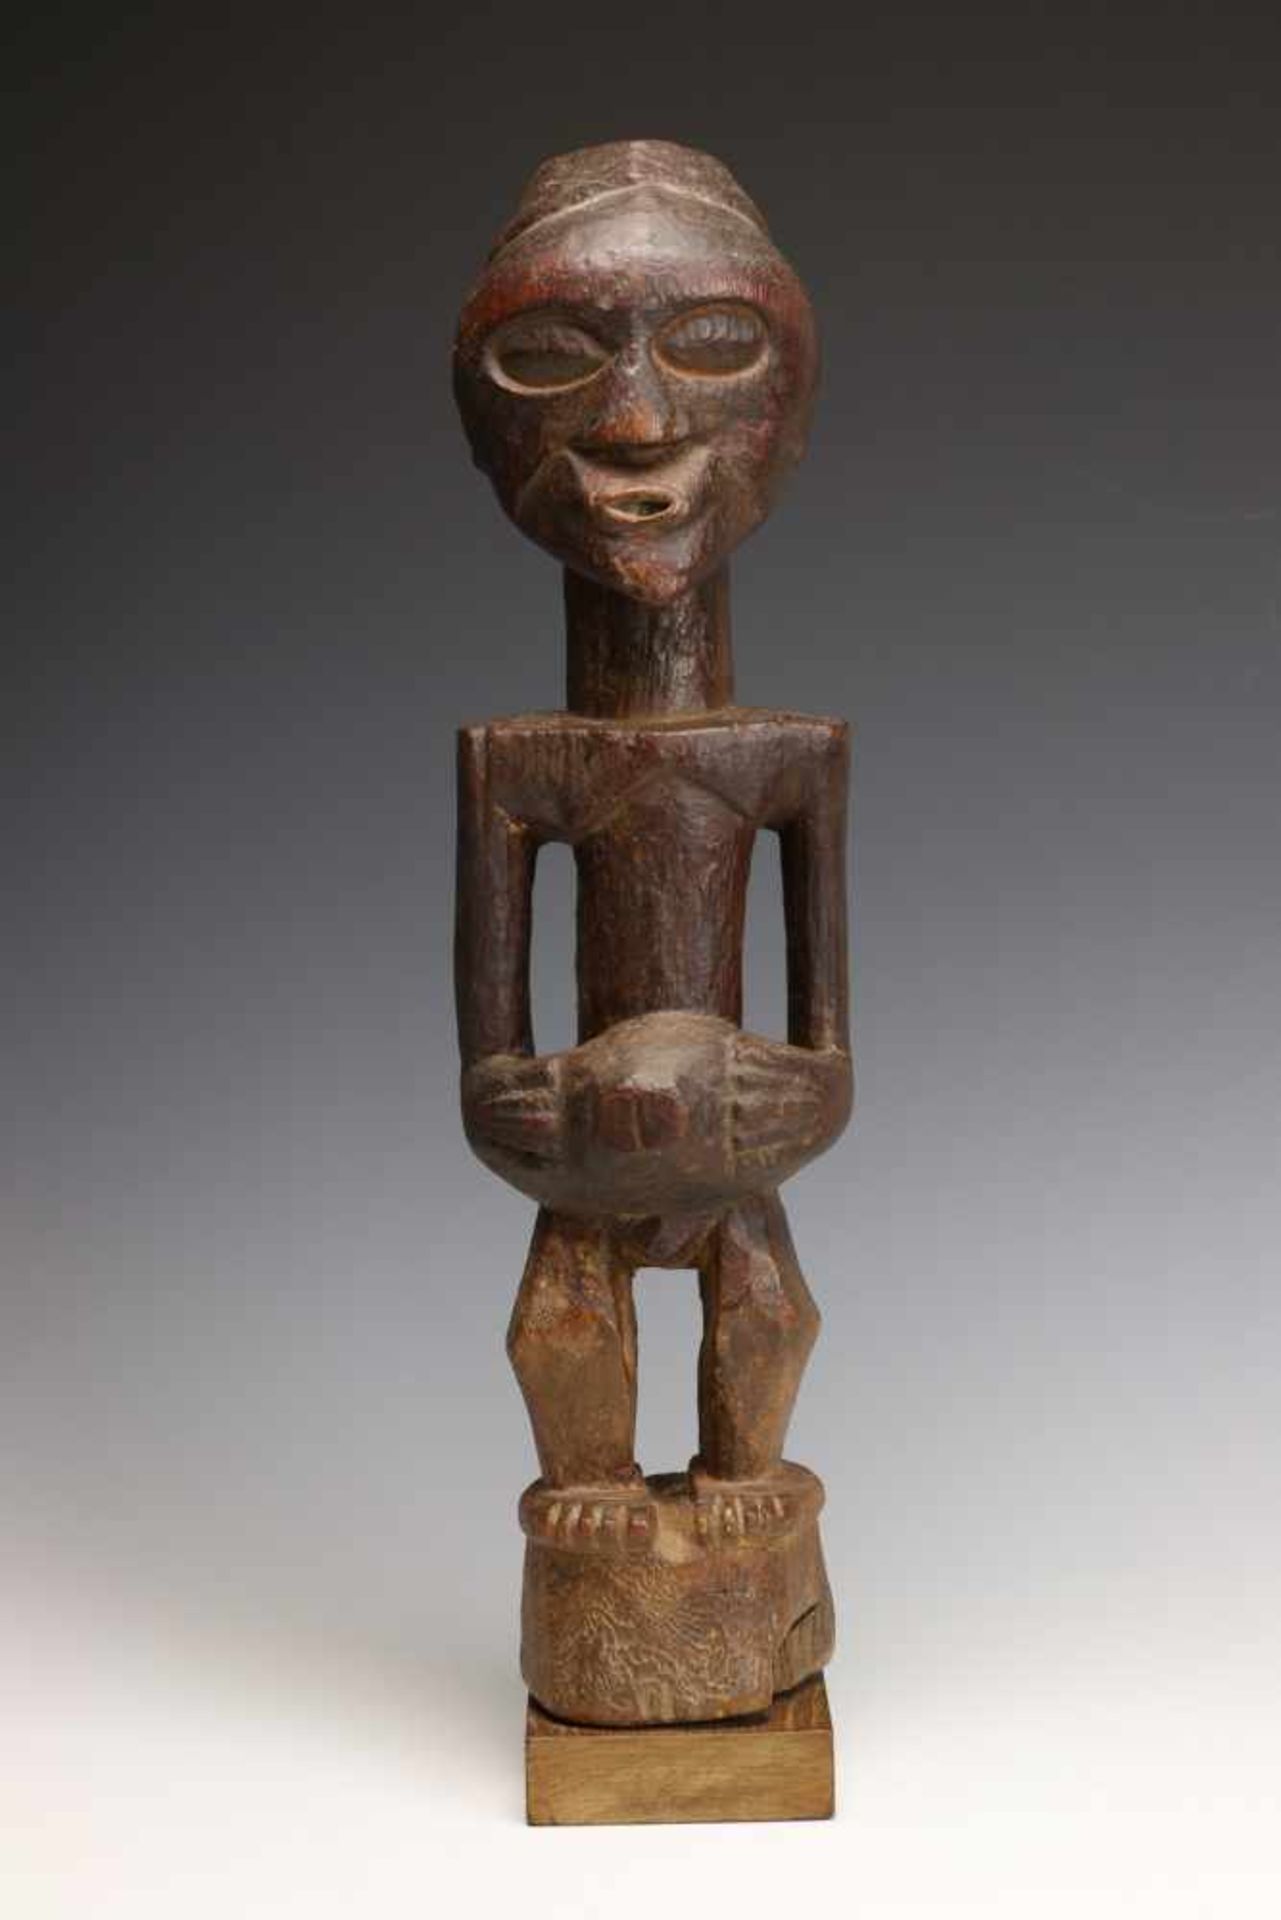 DRC., Songhe, male power figure,with hands on bulbous extention on the stomach, the face with